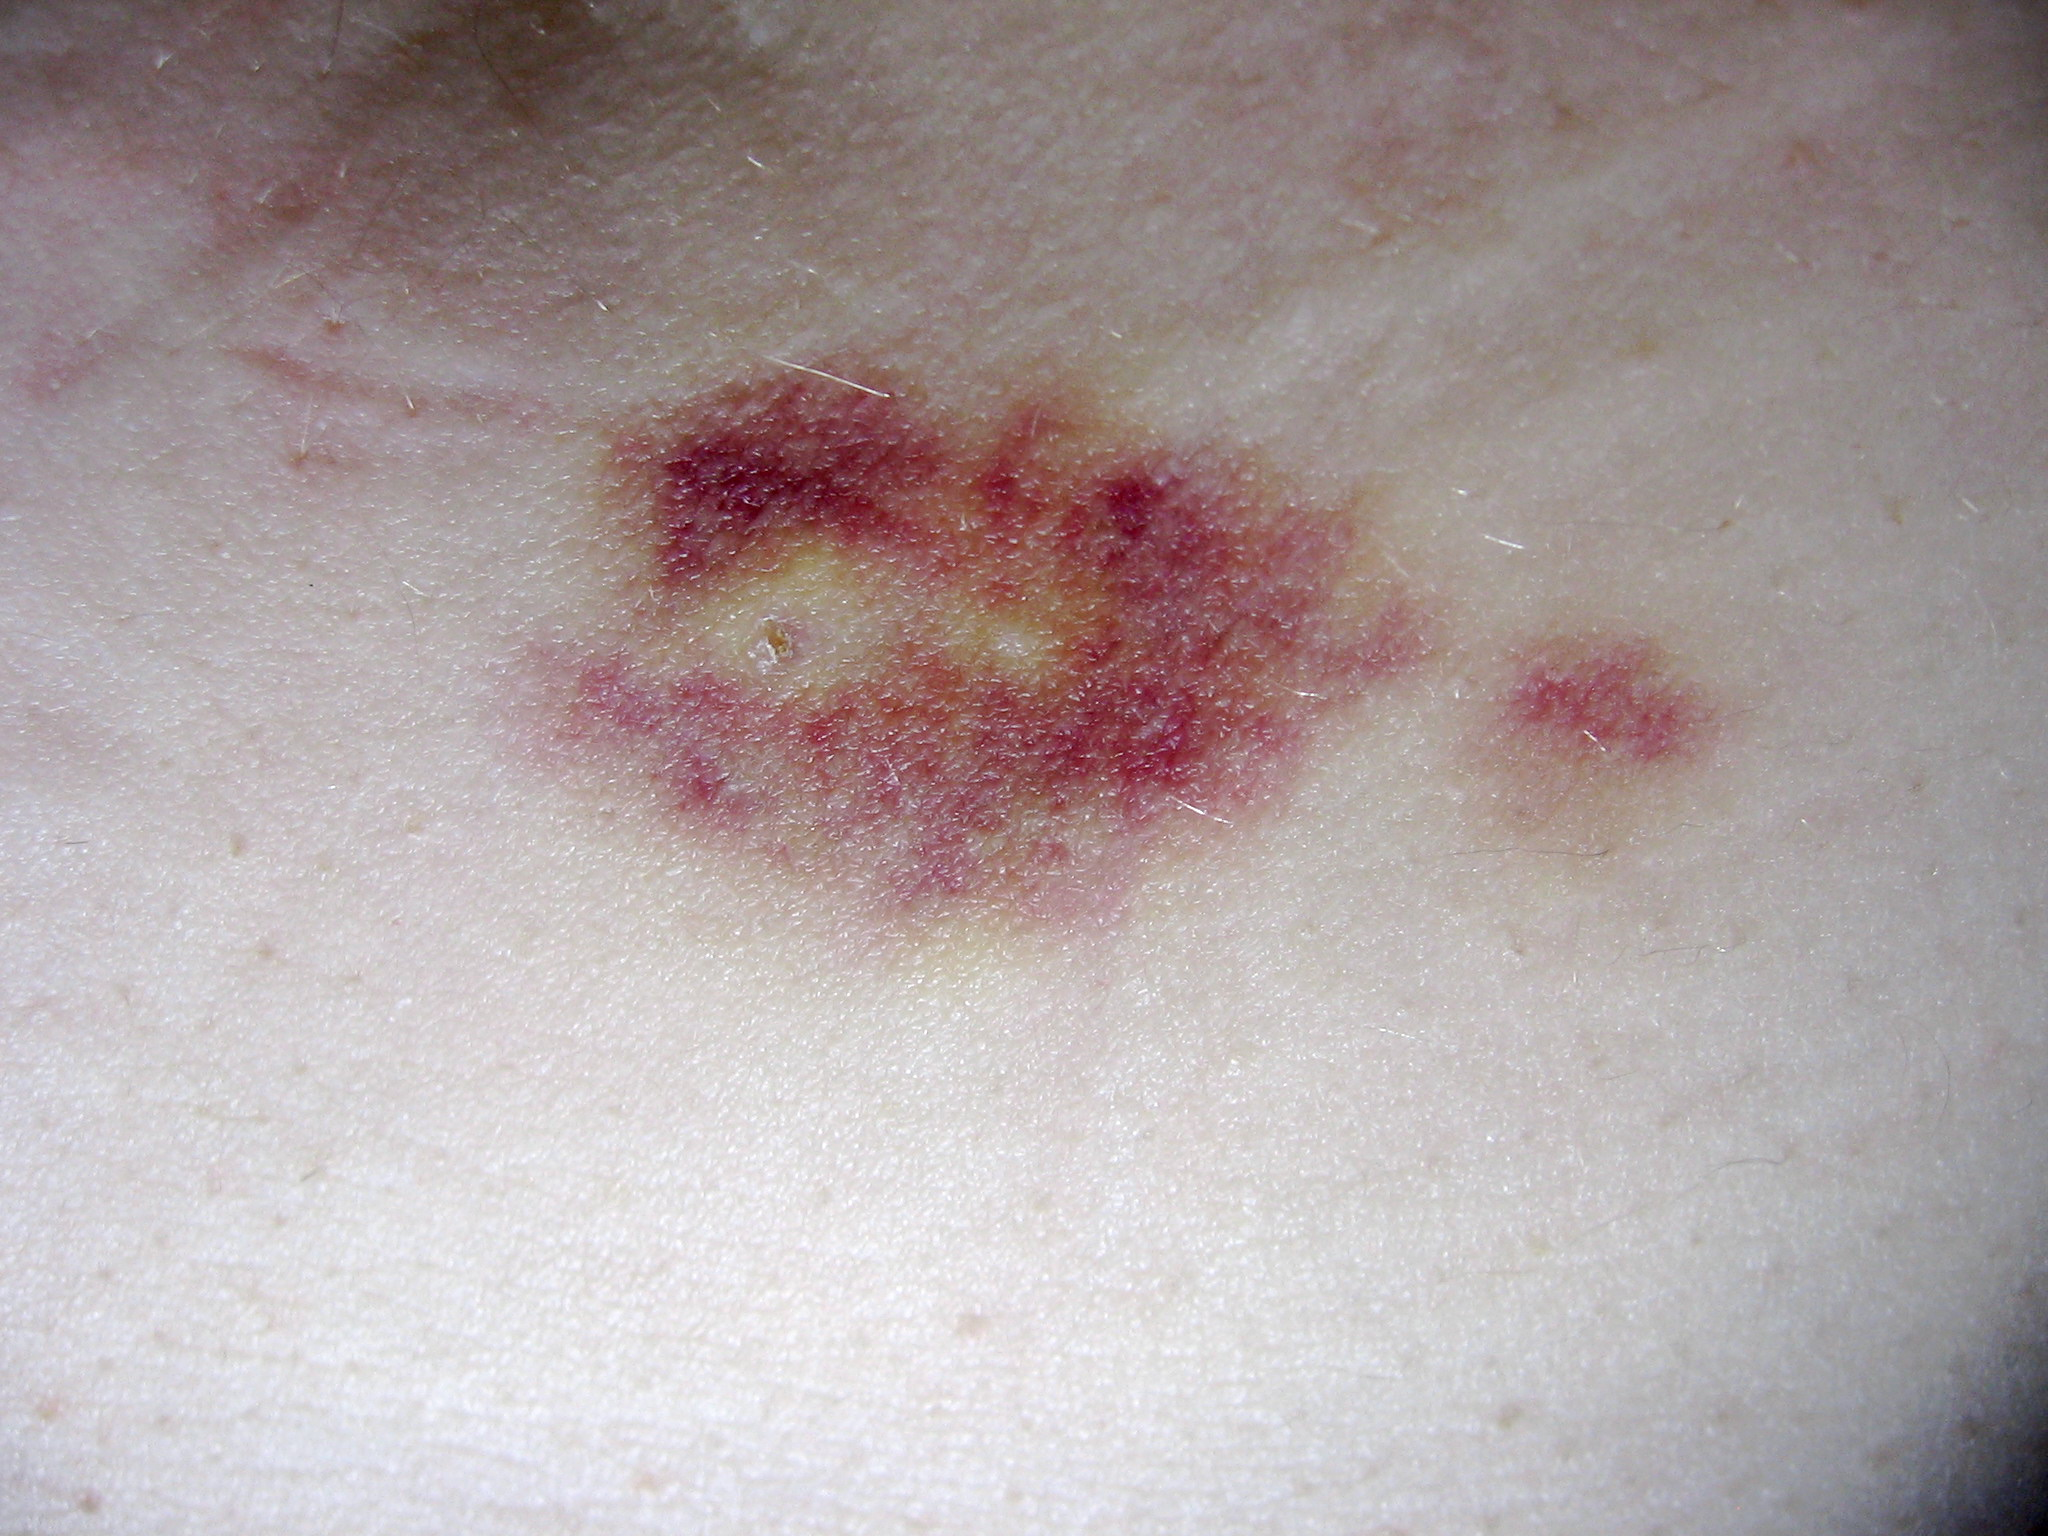 A typical injection site post-implant. The entry wound and pellet ejection bruise can clearly be seen here